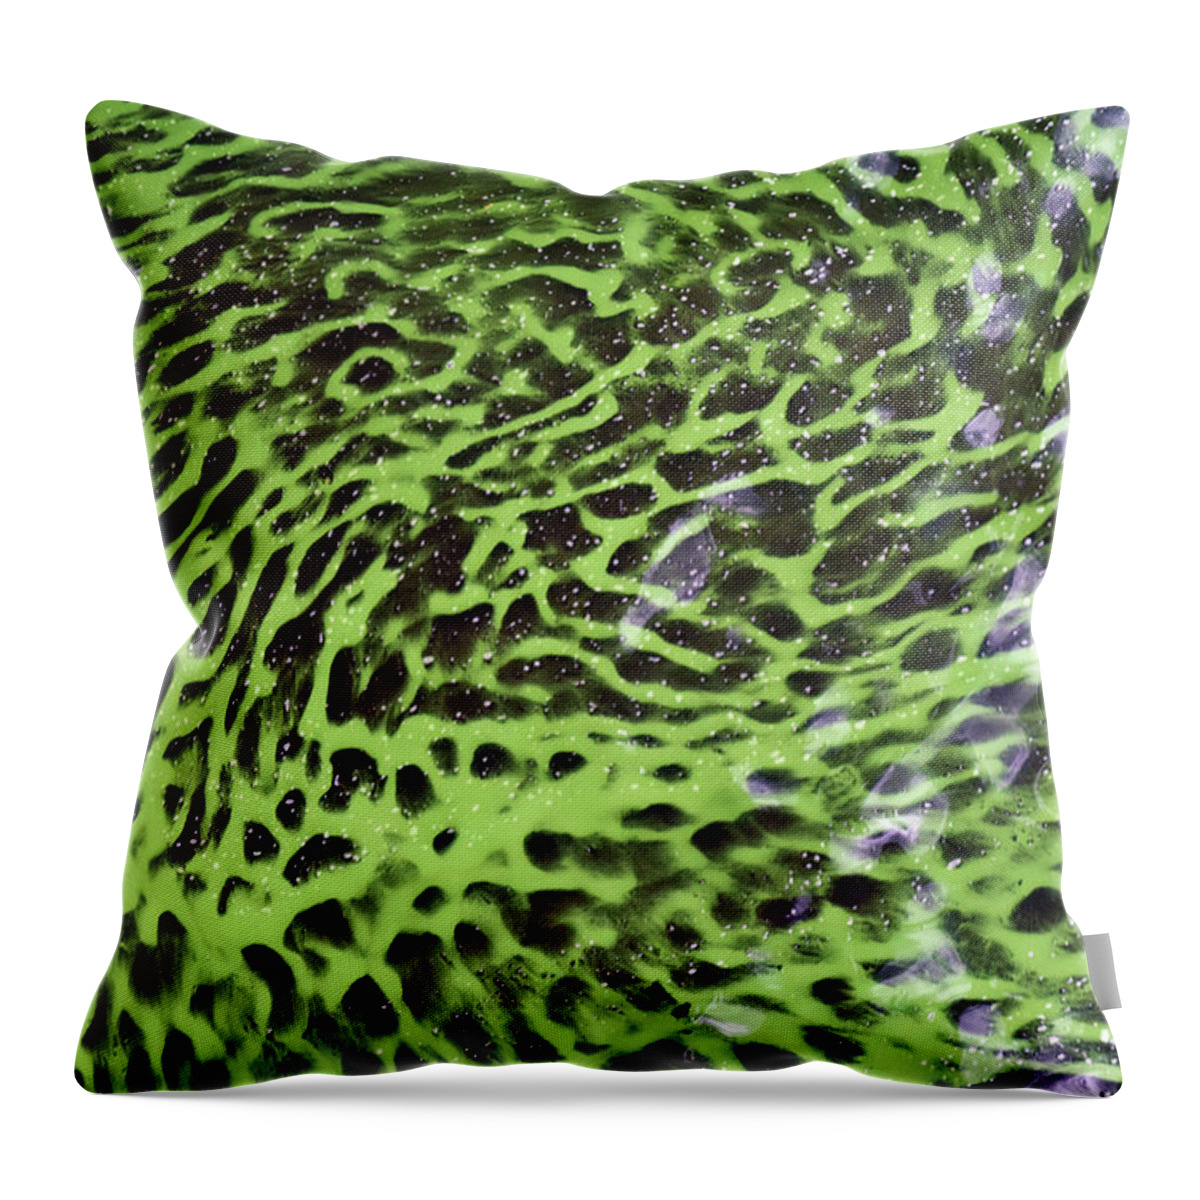 Algal Bloom Throw Pillow featuring the photograph Toxic Cyanobacteria, Florida by Mary Beth Angelo